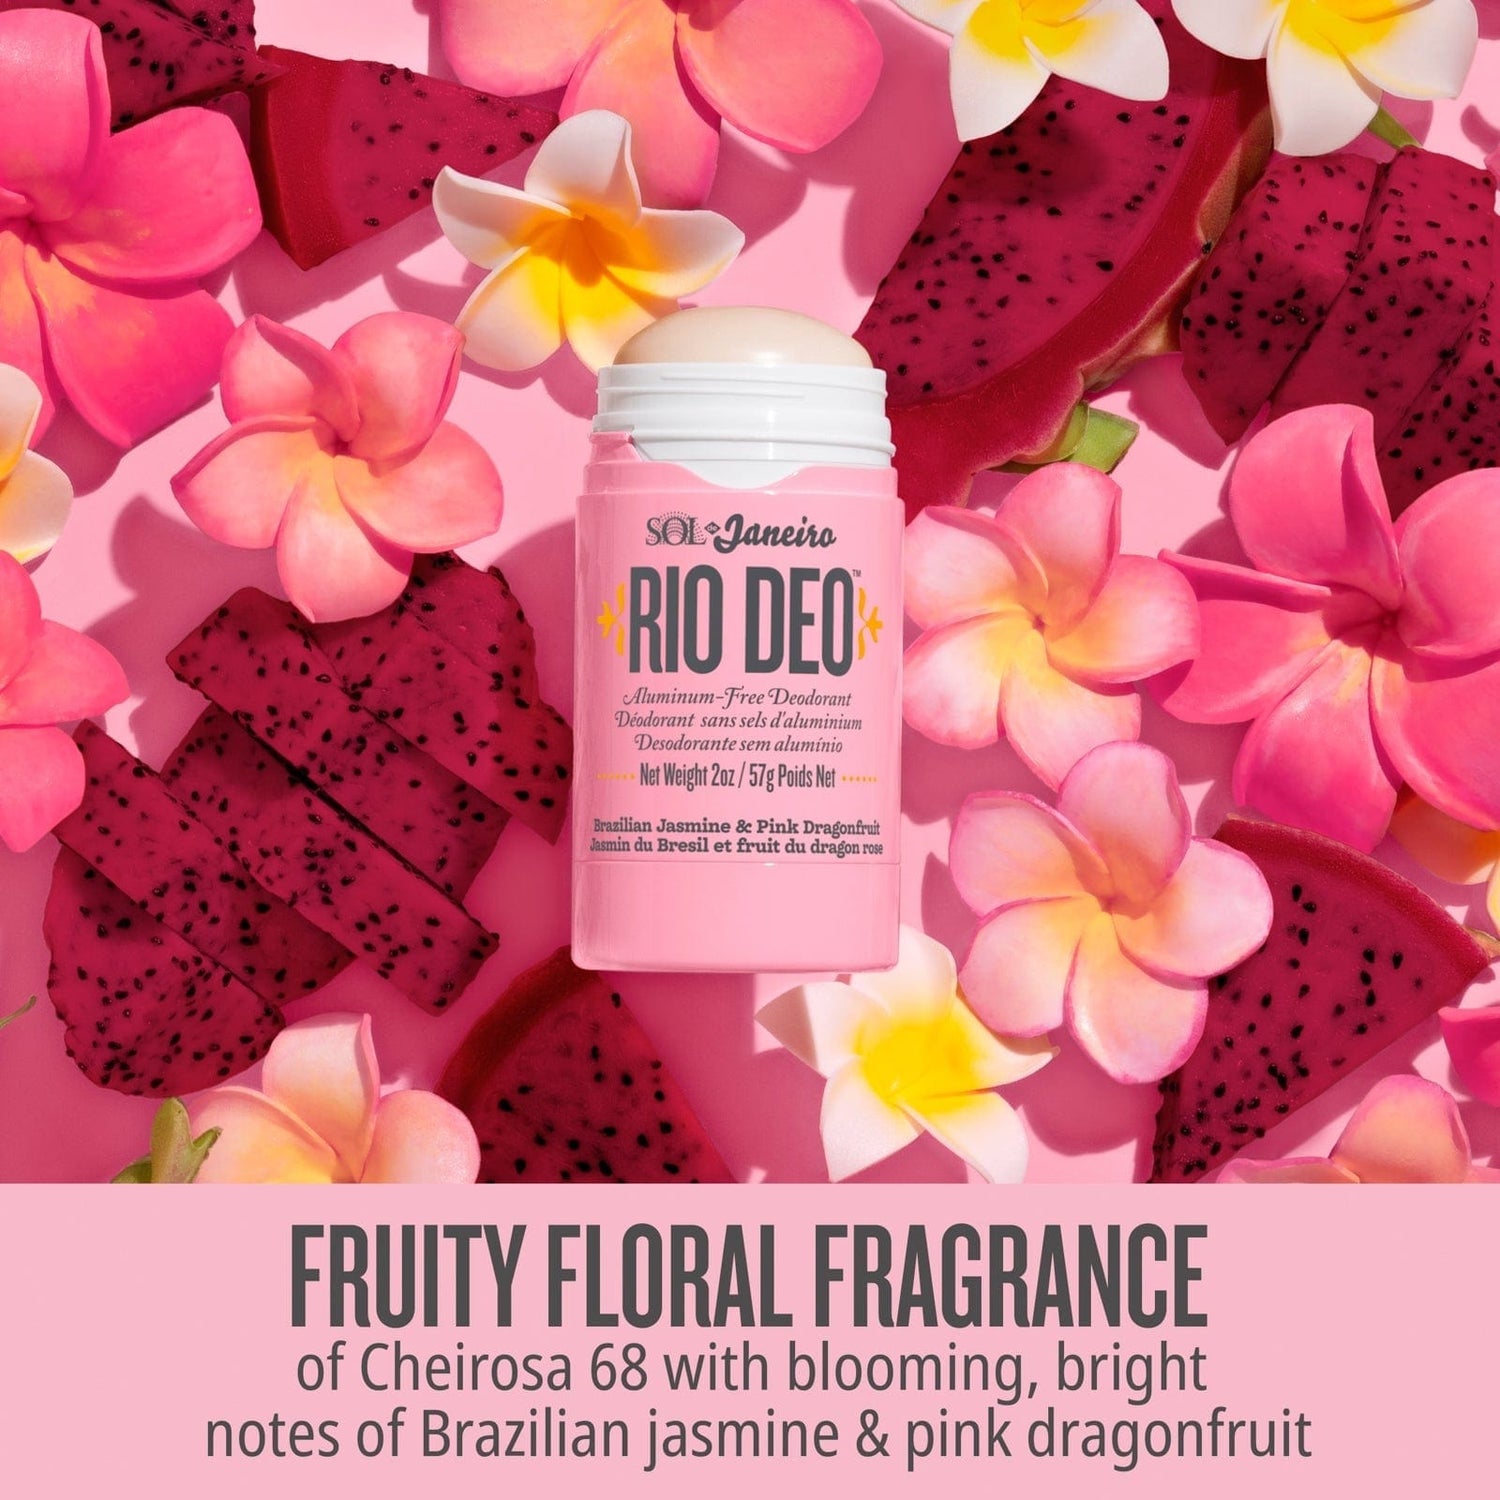 Fruity floral fragrance of cheirosa 68 with blooming, bright notes of Brazilian jasmine &amp; pink dragonfruit 